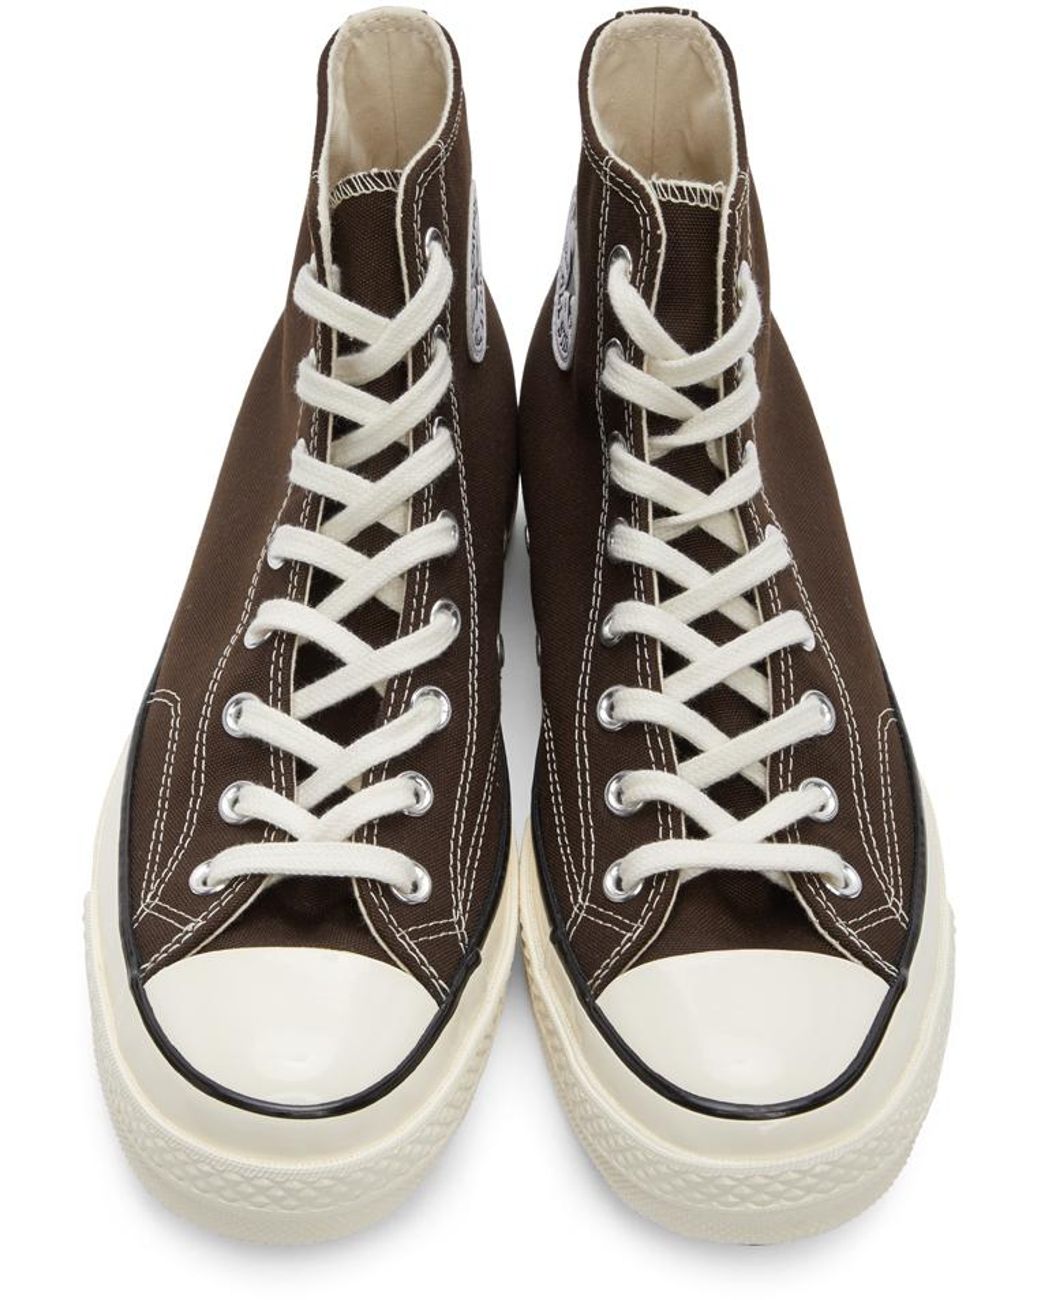 Converse Chuck 70 High Sneakers in Brown | Lyst Canada